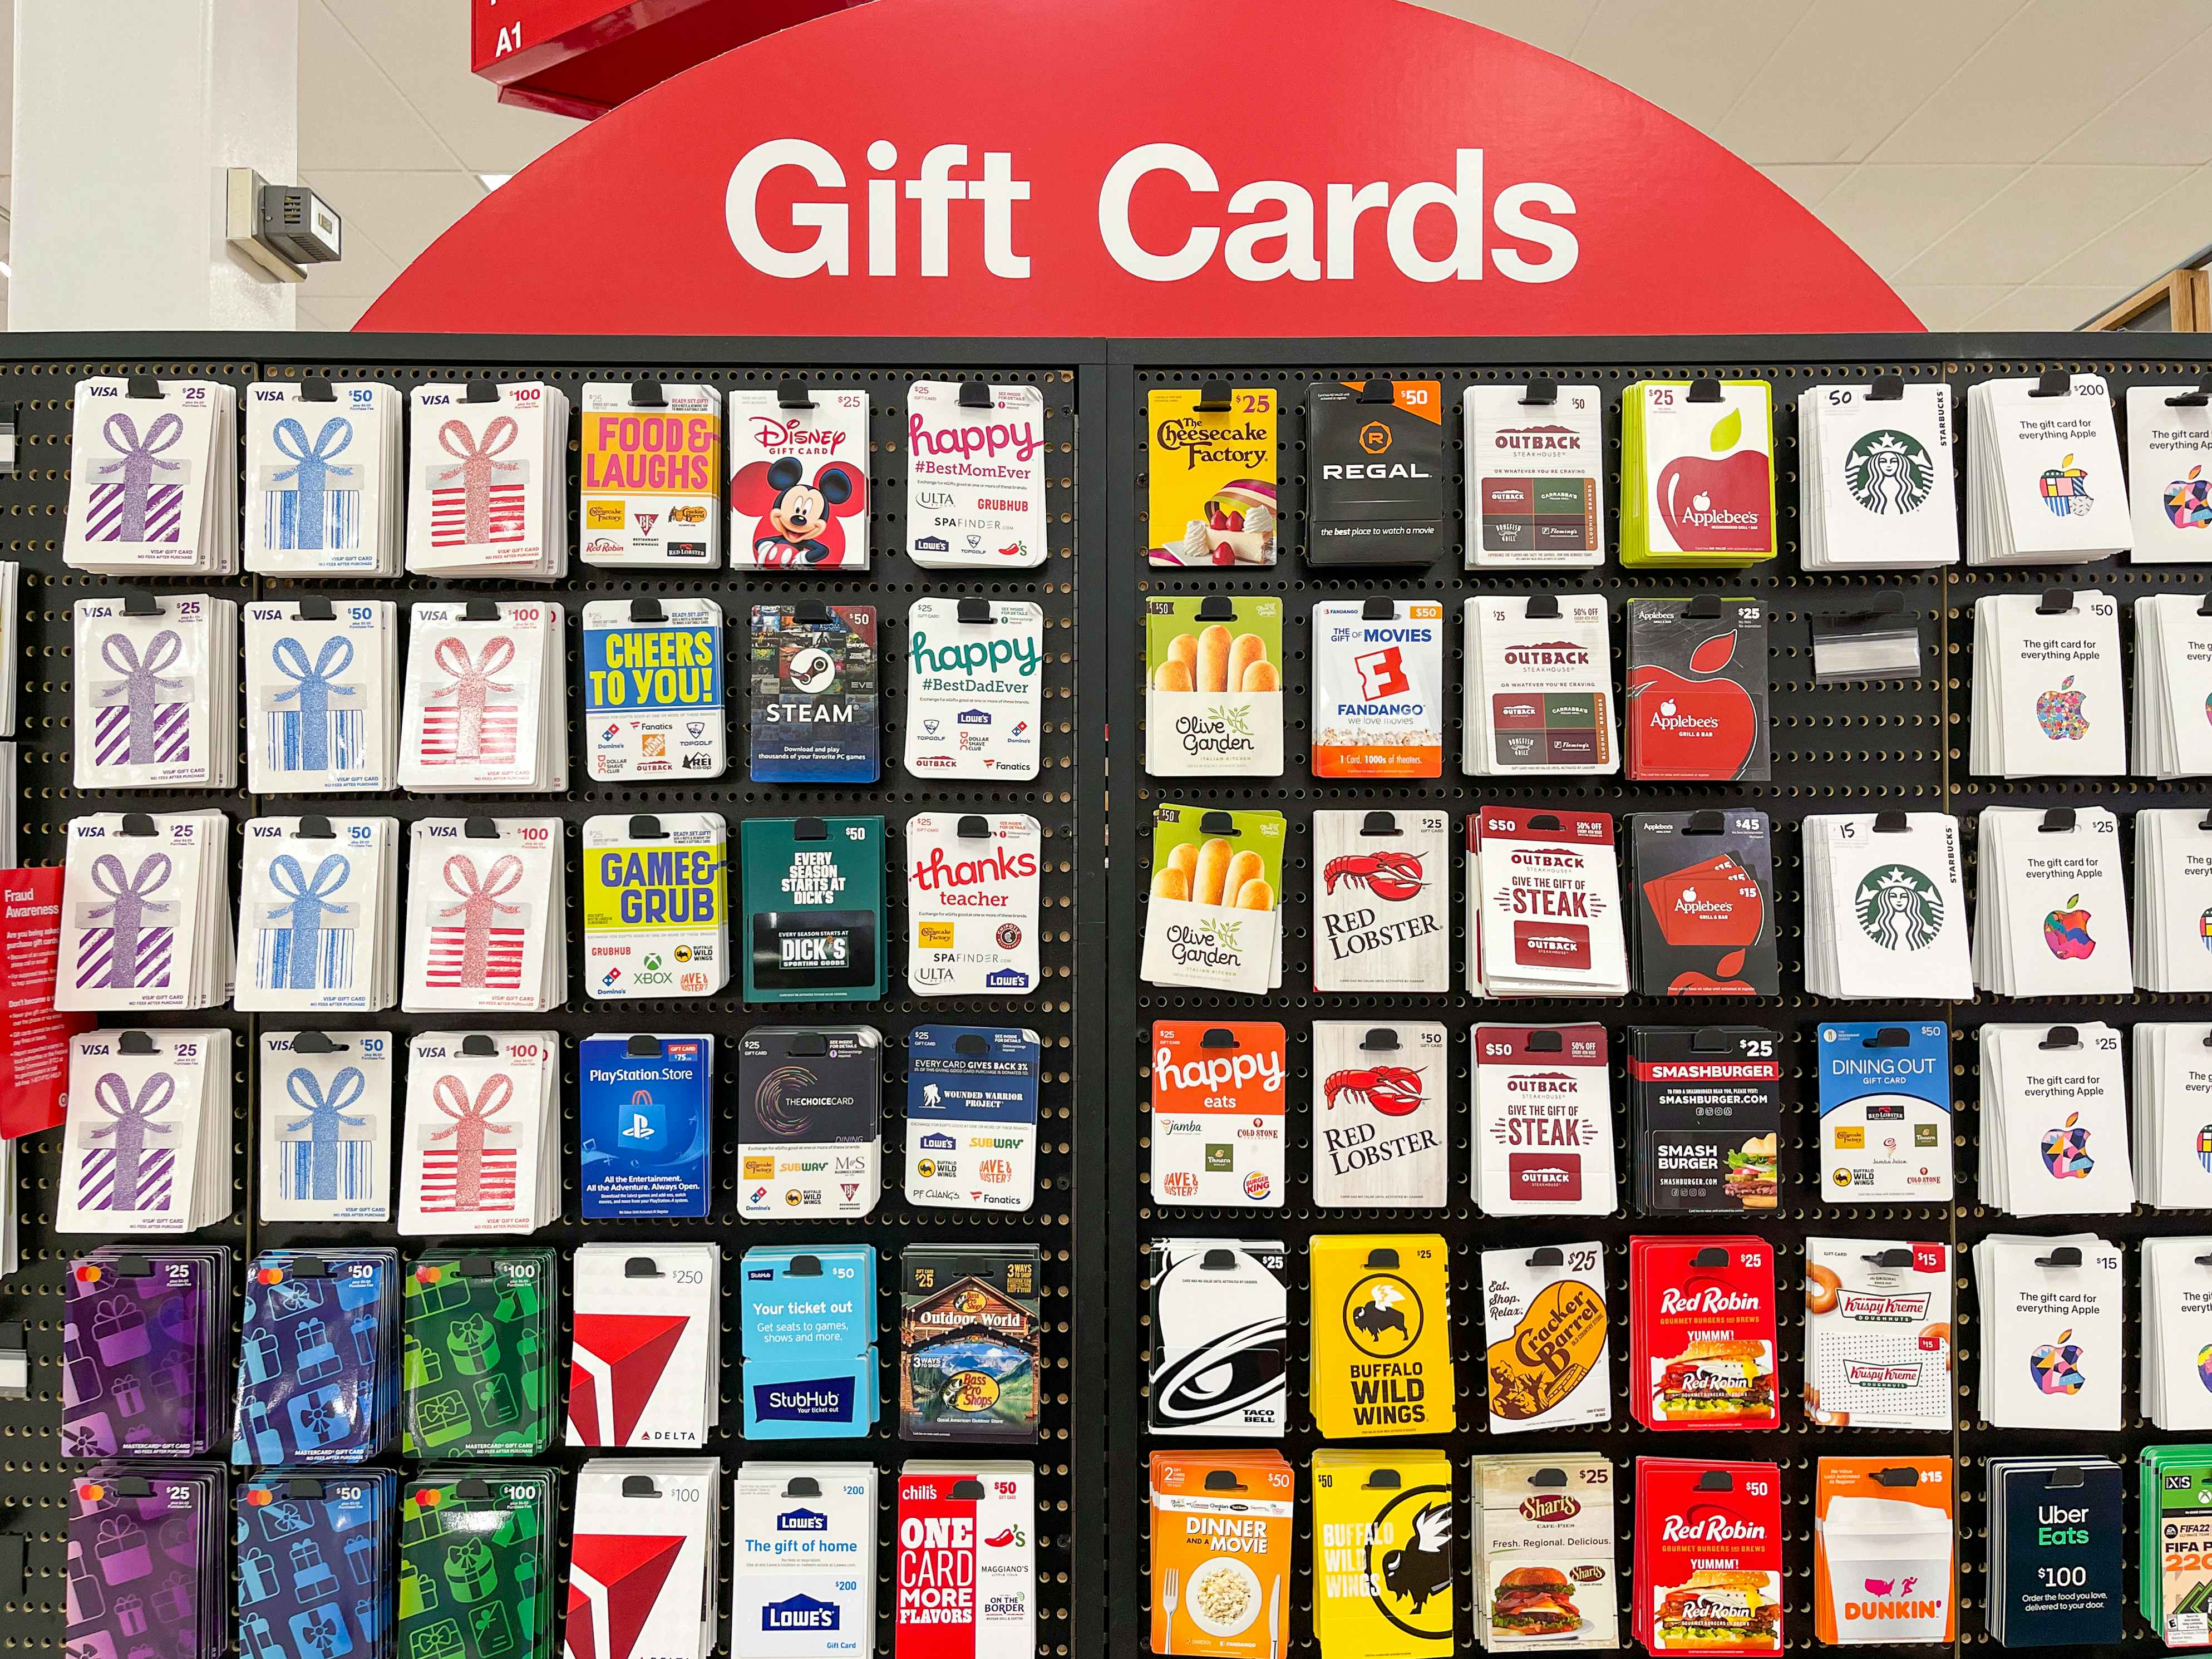 A wall display of gift cards for stores, restaurants, and more inside a Target.